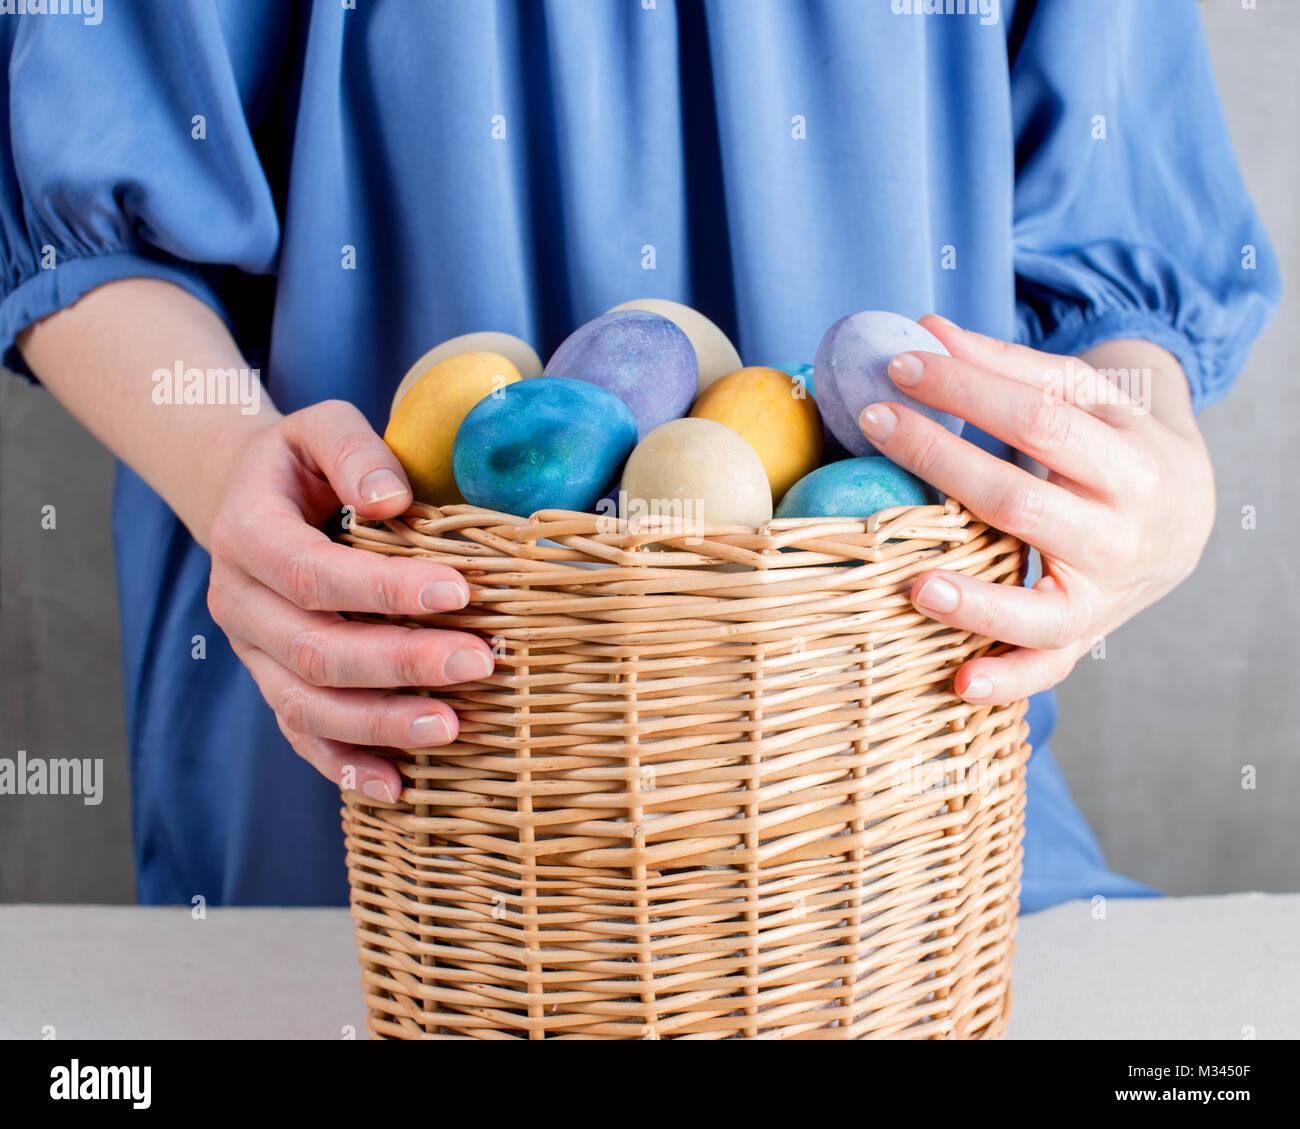 Woman in the blue dress holding the basket with colored yellow easter eggs Stock Photo